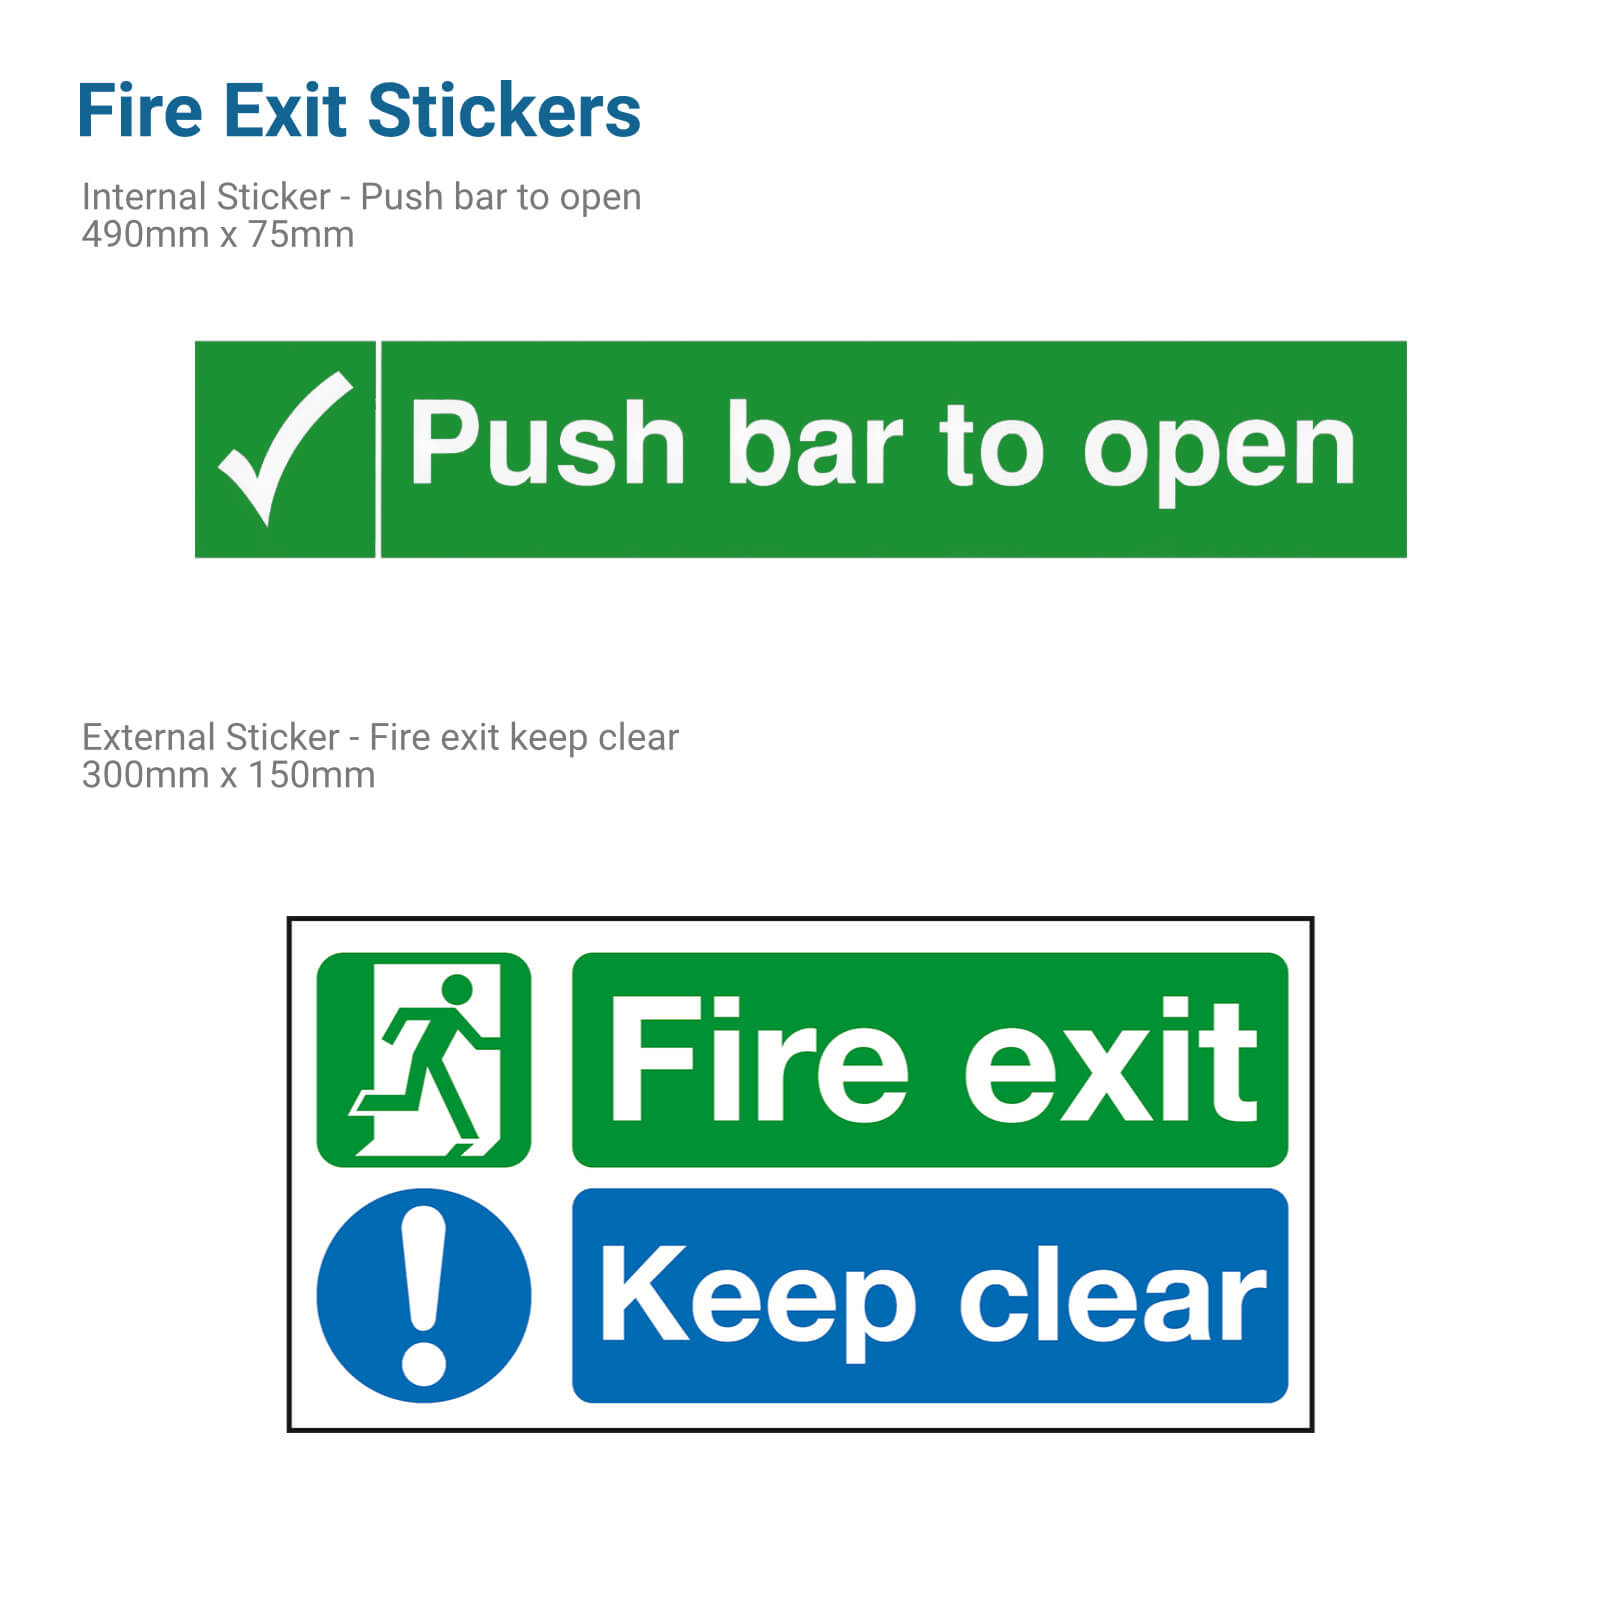 Fire exit stickers